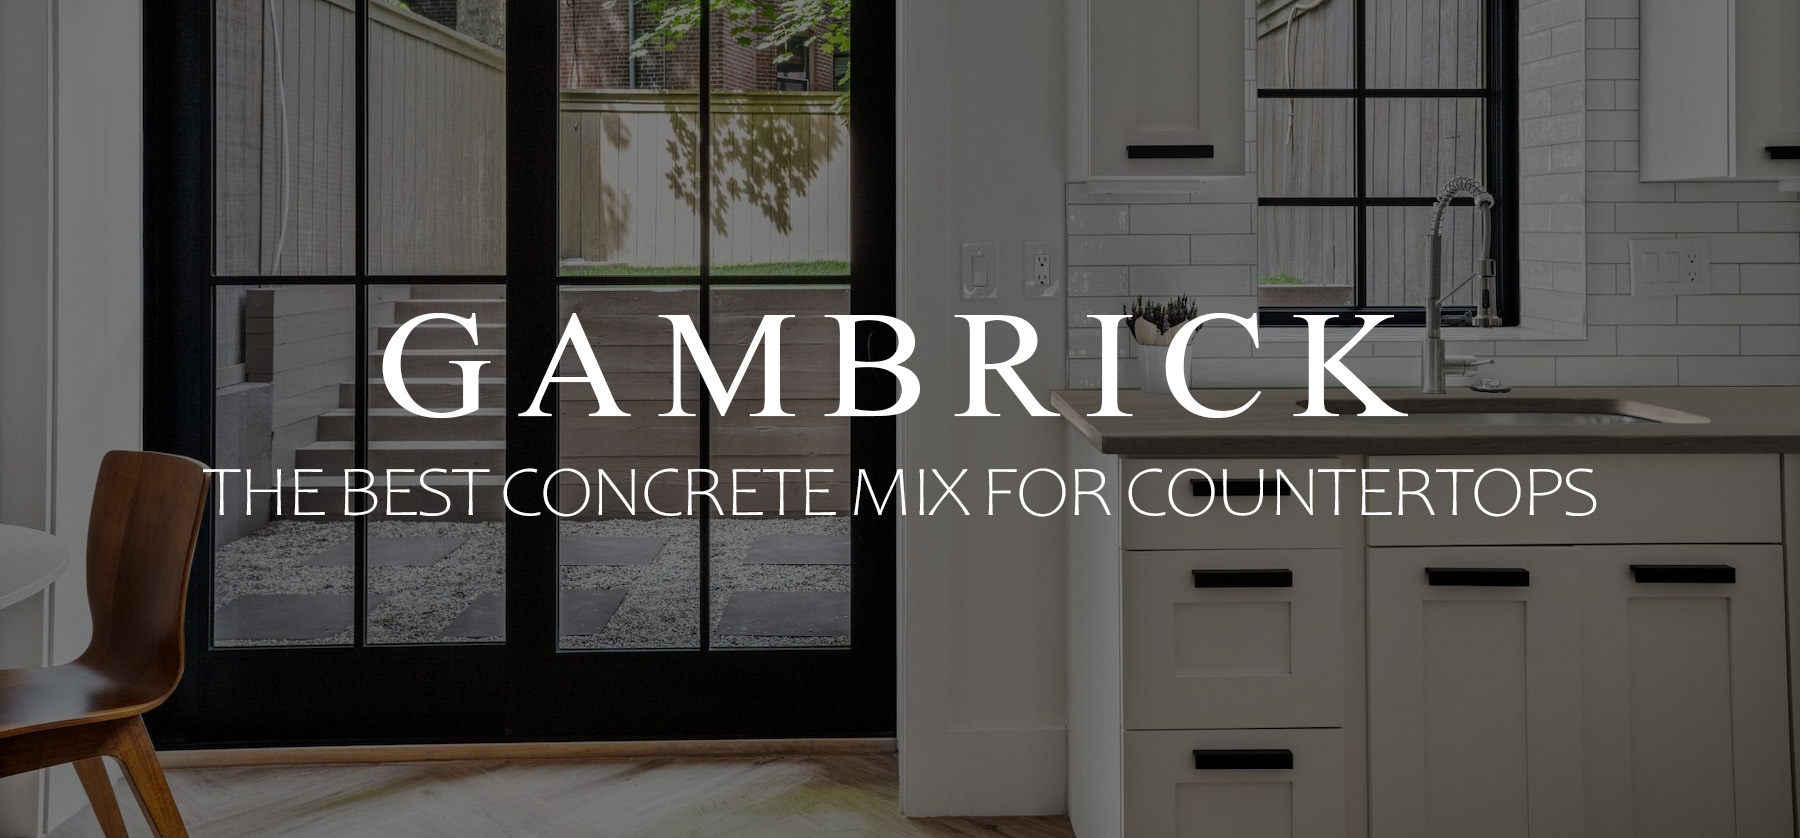 the best concrete mix for countertops banner